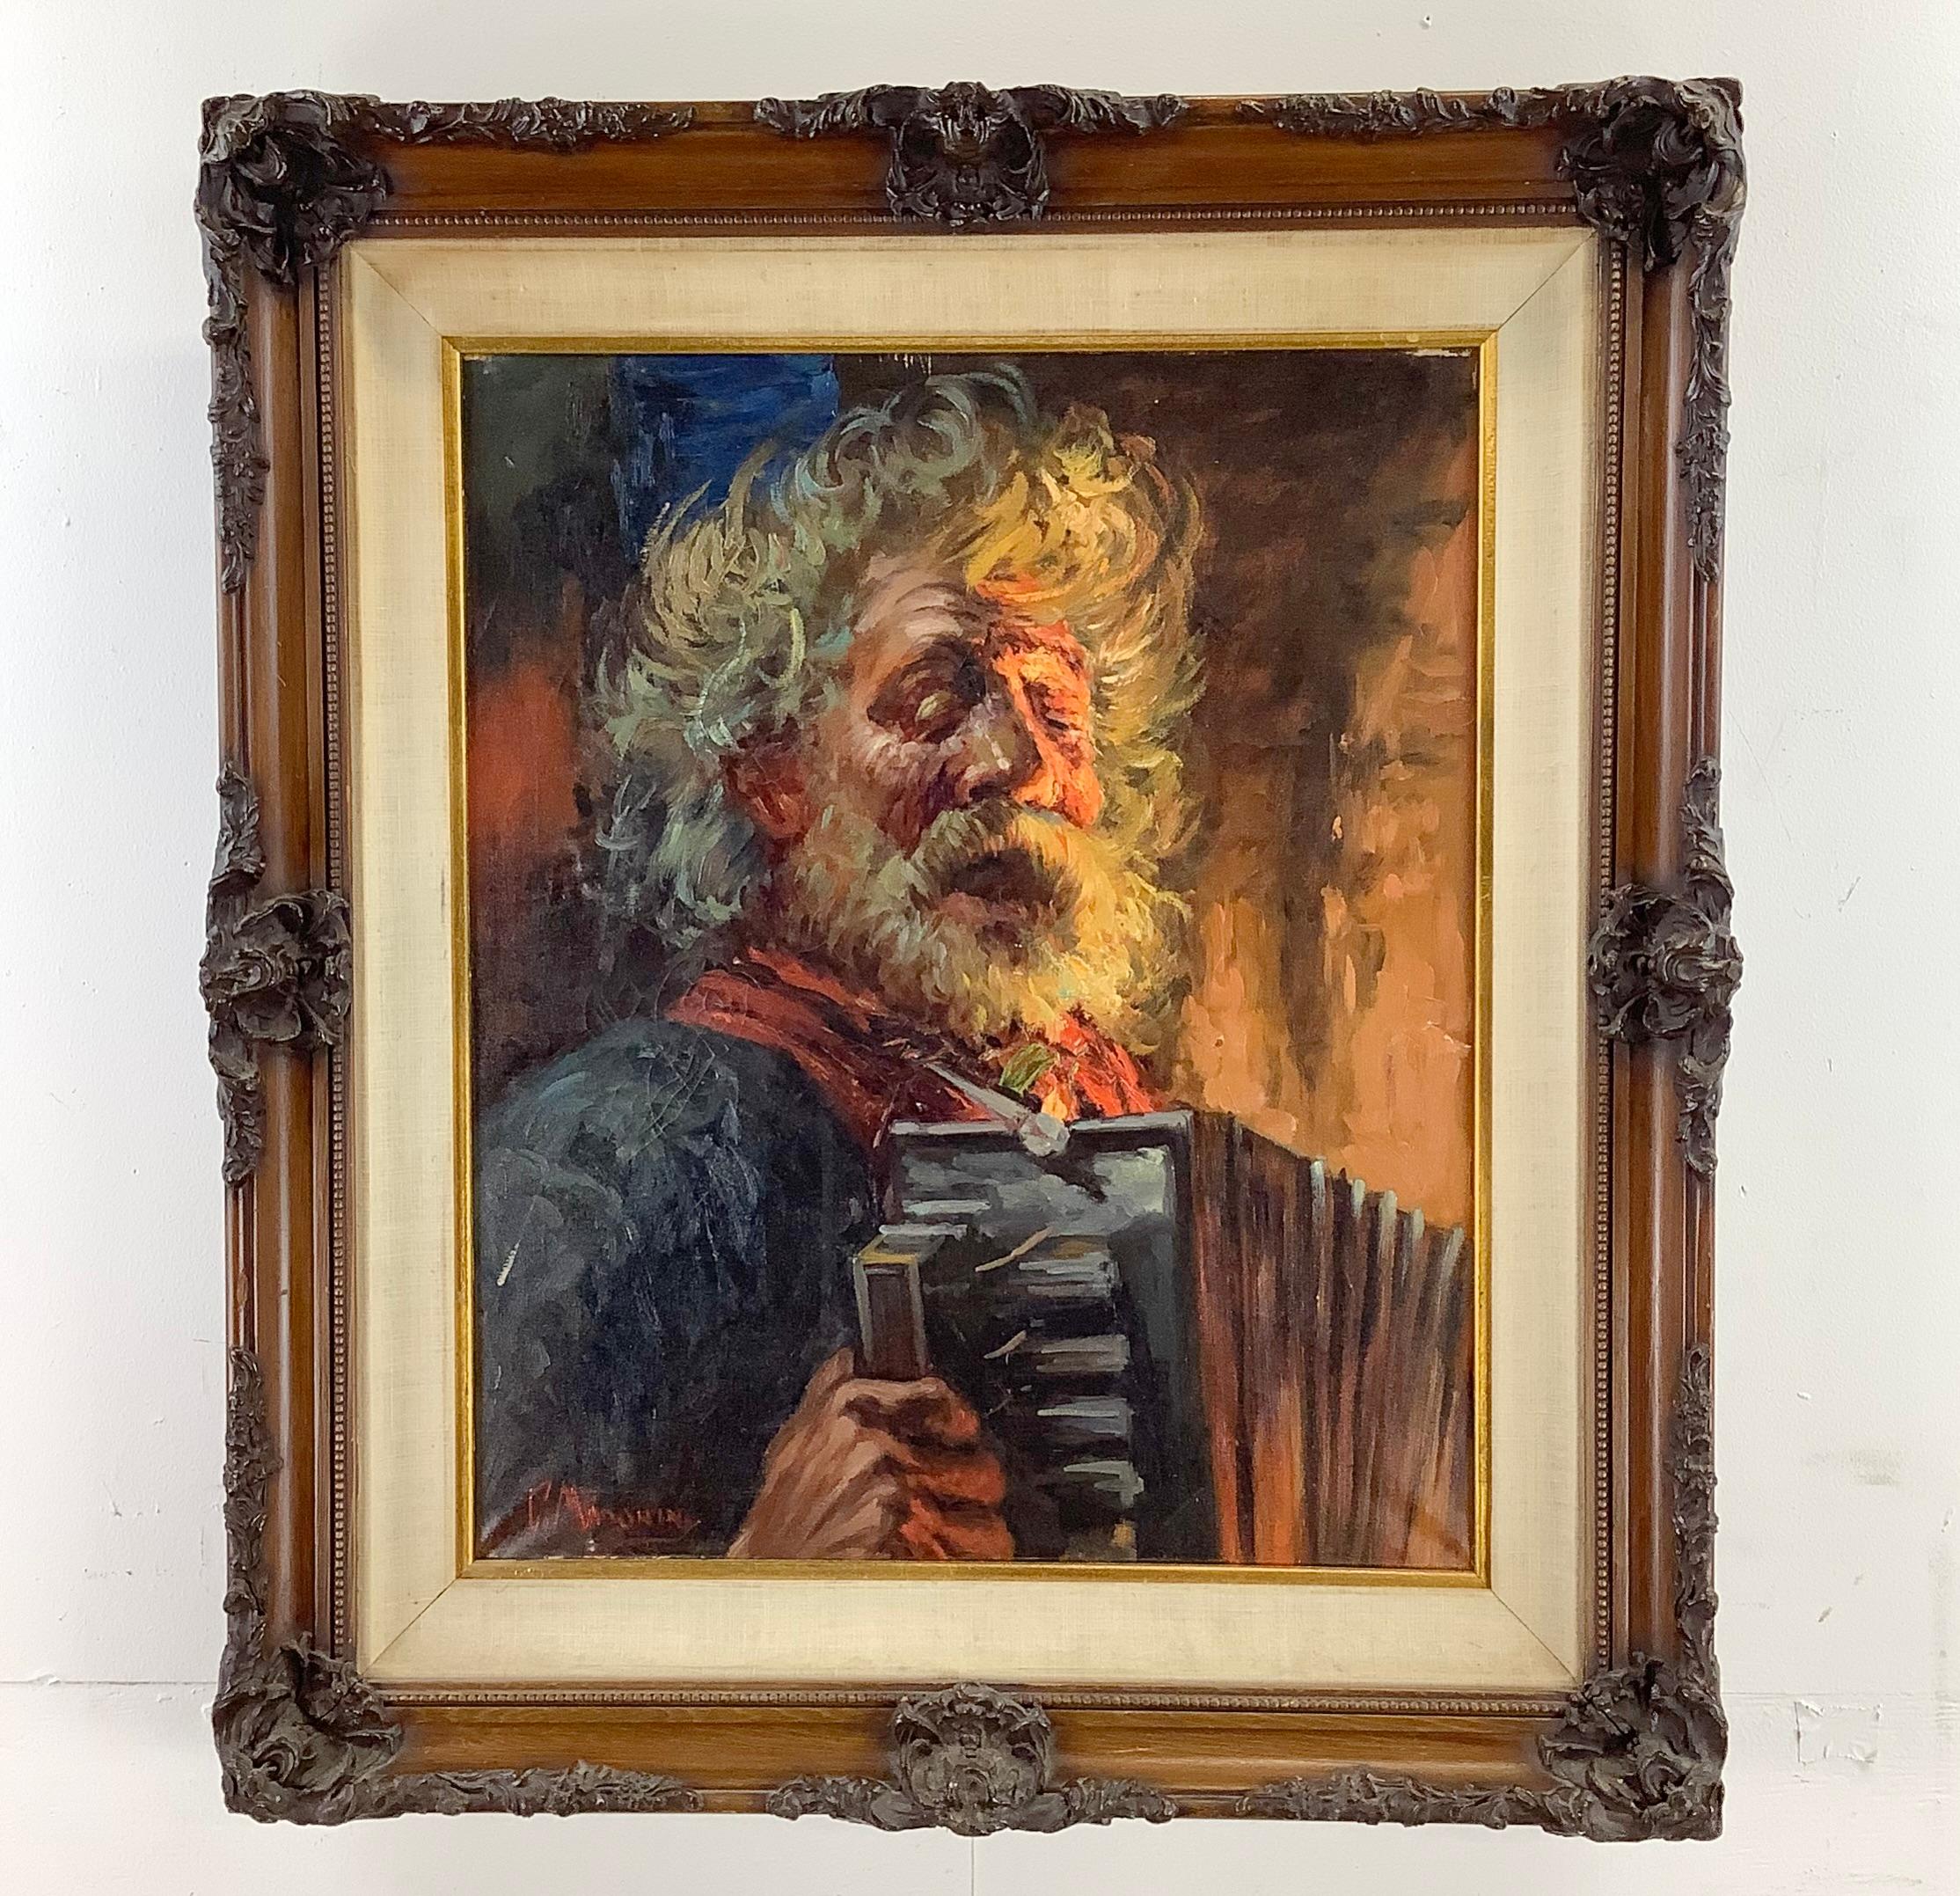 The impressive mid-century oil on canvas depicts a red-faced and white haired accordion player signed G. Madonini. The rich palette of this vintage painting is attributed to Giovanni Madonini based on signature and brings a warm energy to any